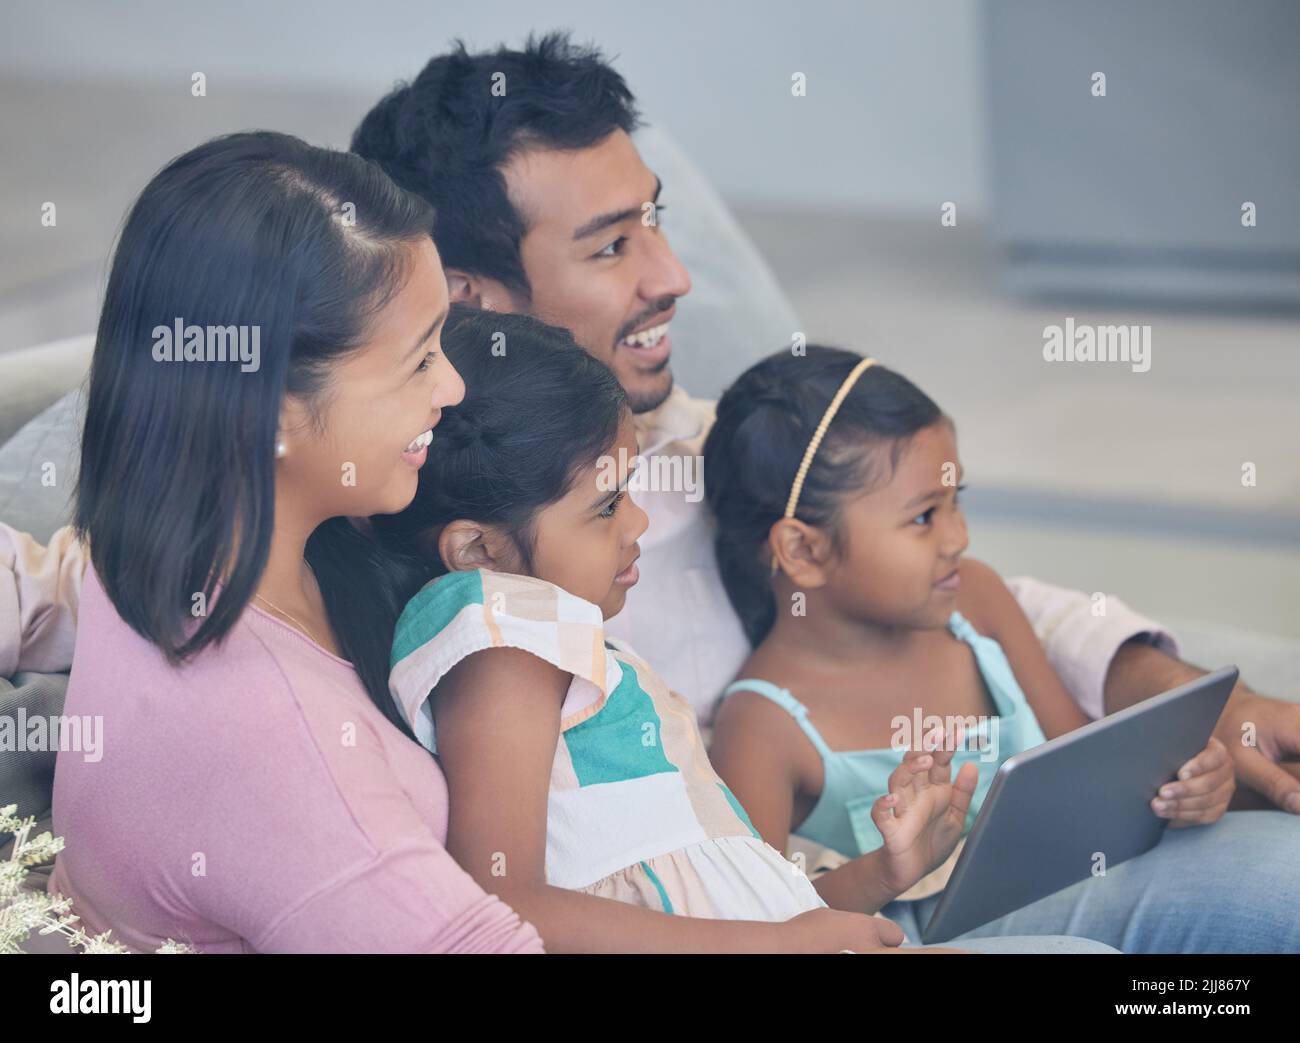 Teaching the little ones the way of the world. a young family relaxing together while using a digital tablet. Stock Photo